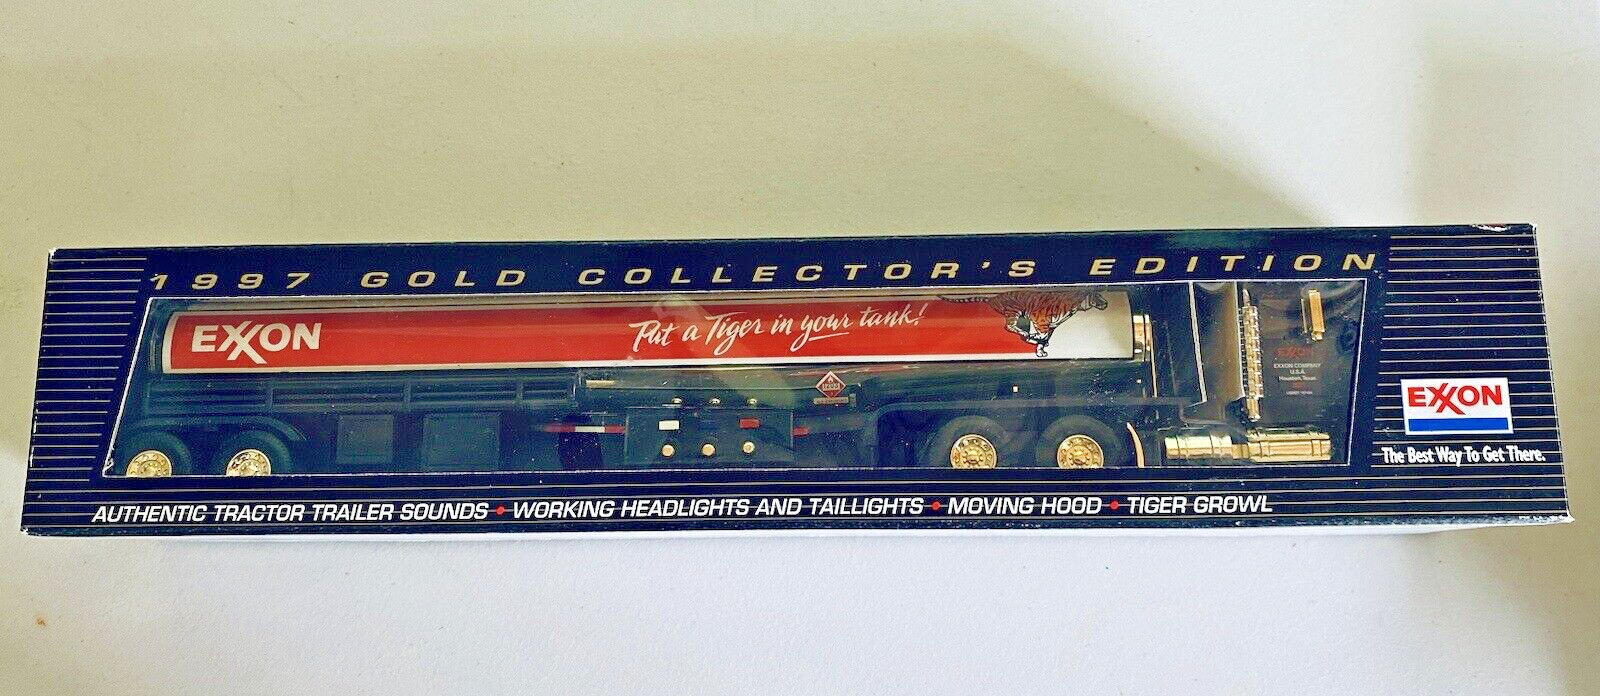 1997 EXXON GOLD COLLECTOR'S EDITION TANKER TRUCK 6th IN A SERIES Mint in Box